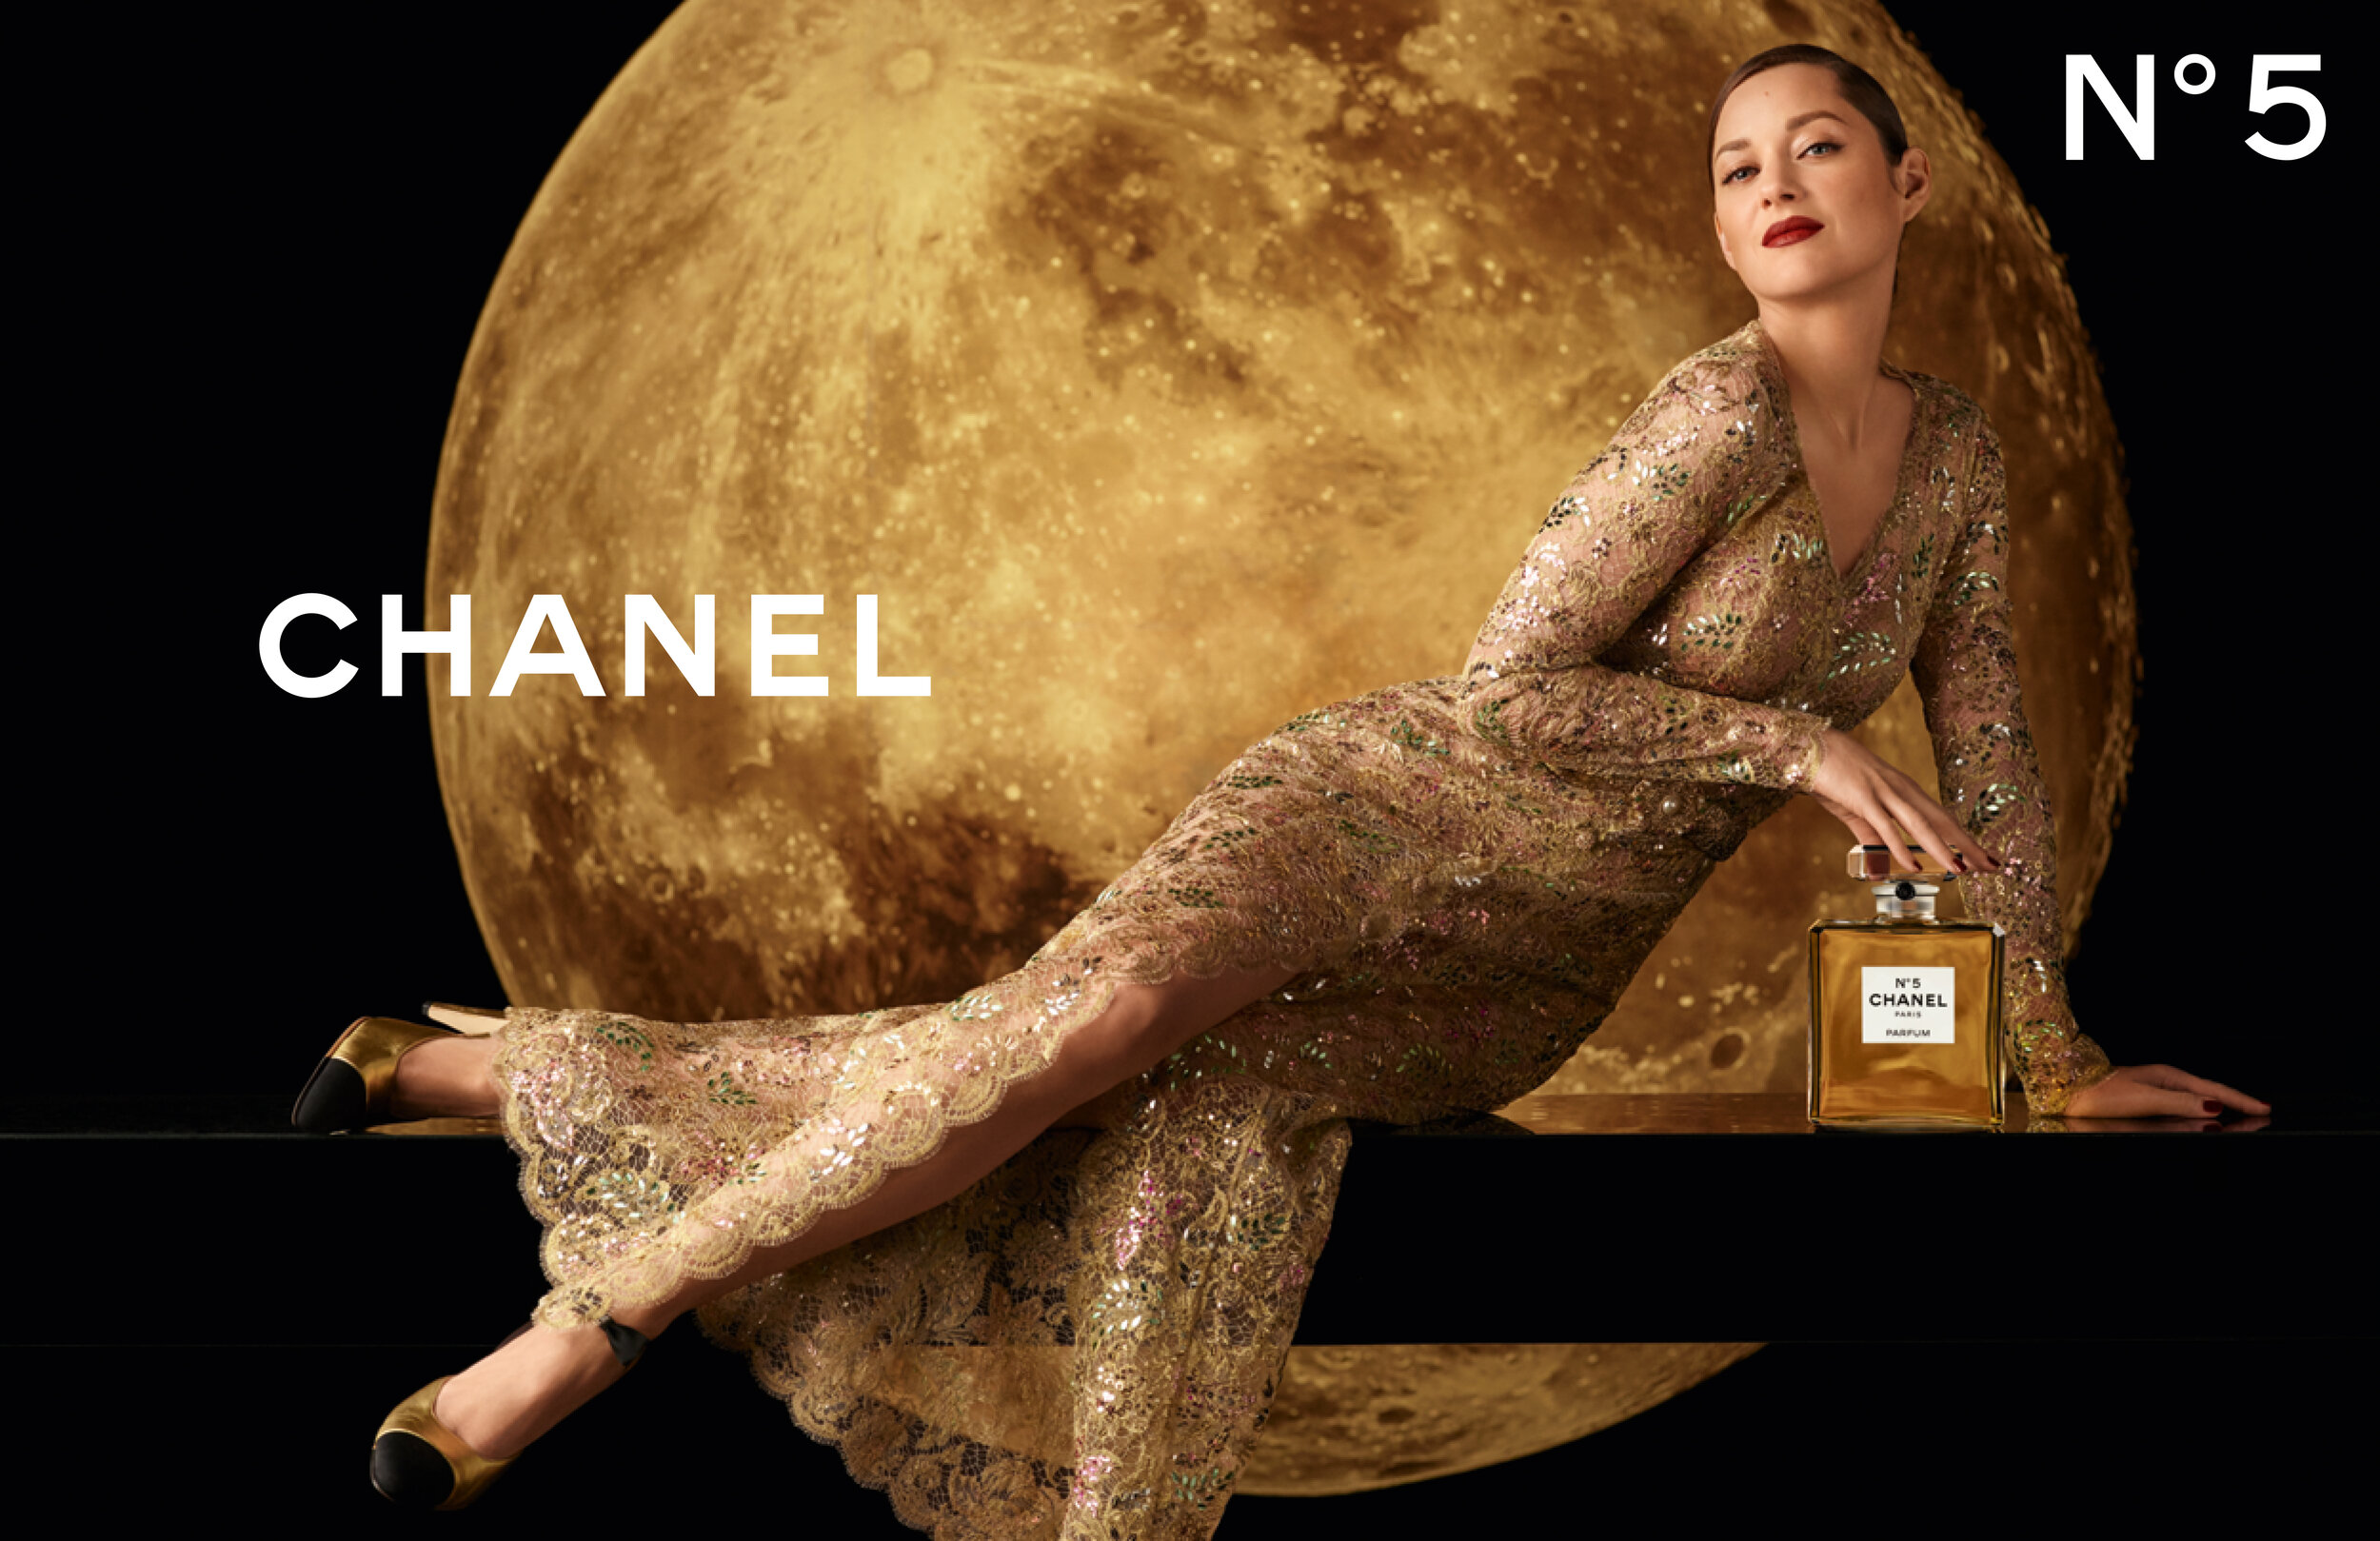 Chanel Nº5 2020/2021 campaign starring Marion Cotillard, photographed by Steven Meisel